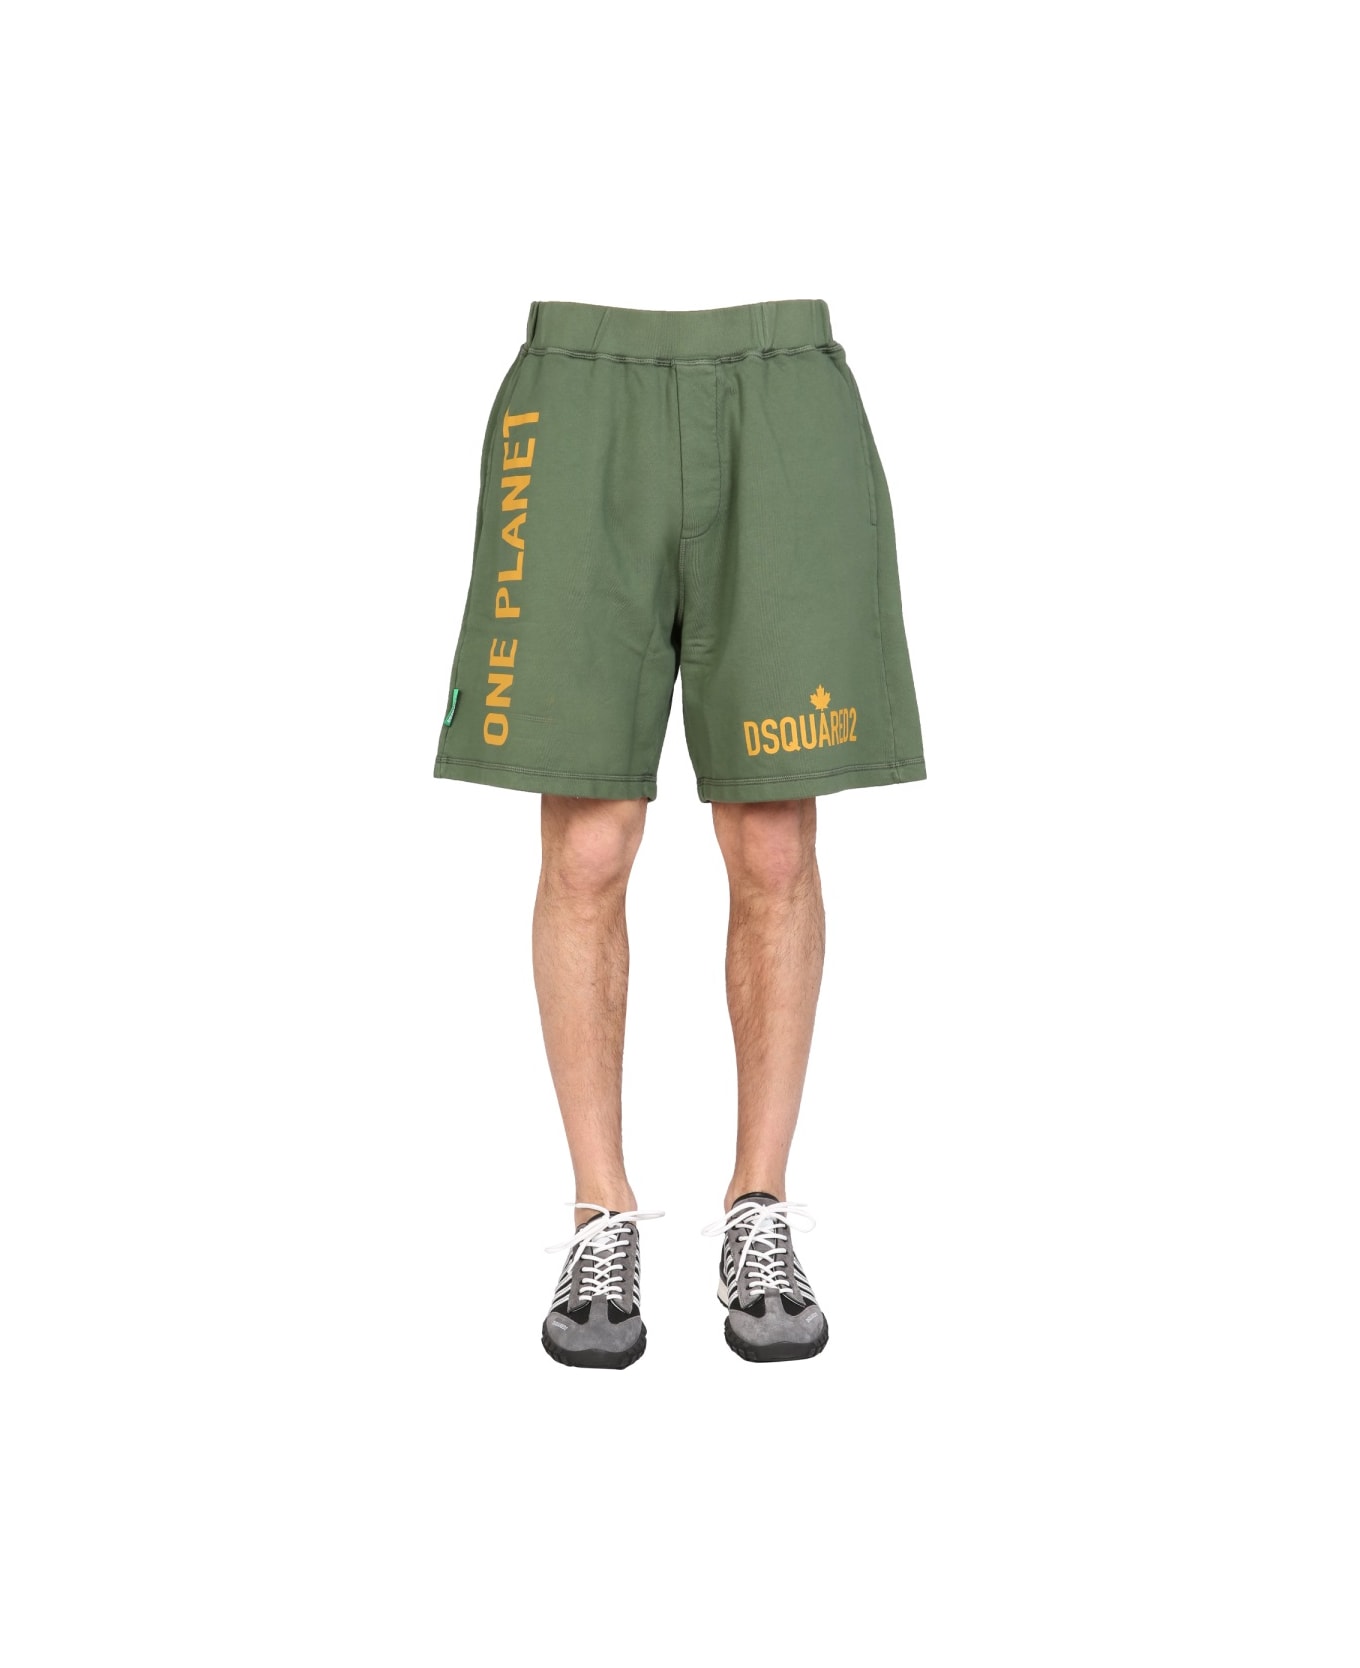 Dsquared2 "one Life One Planet" Bermuda Shorts - GREEN ショートパンツ